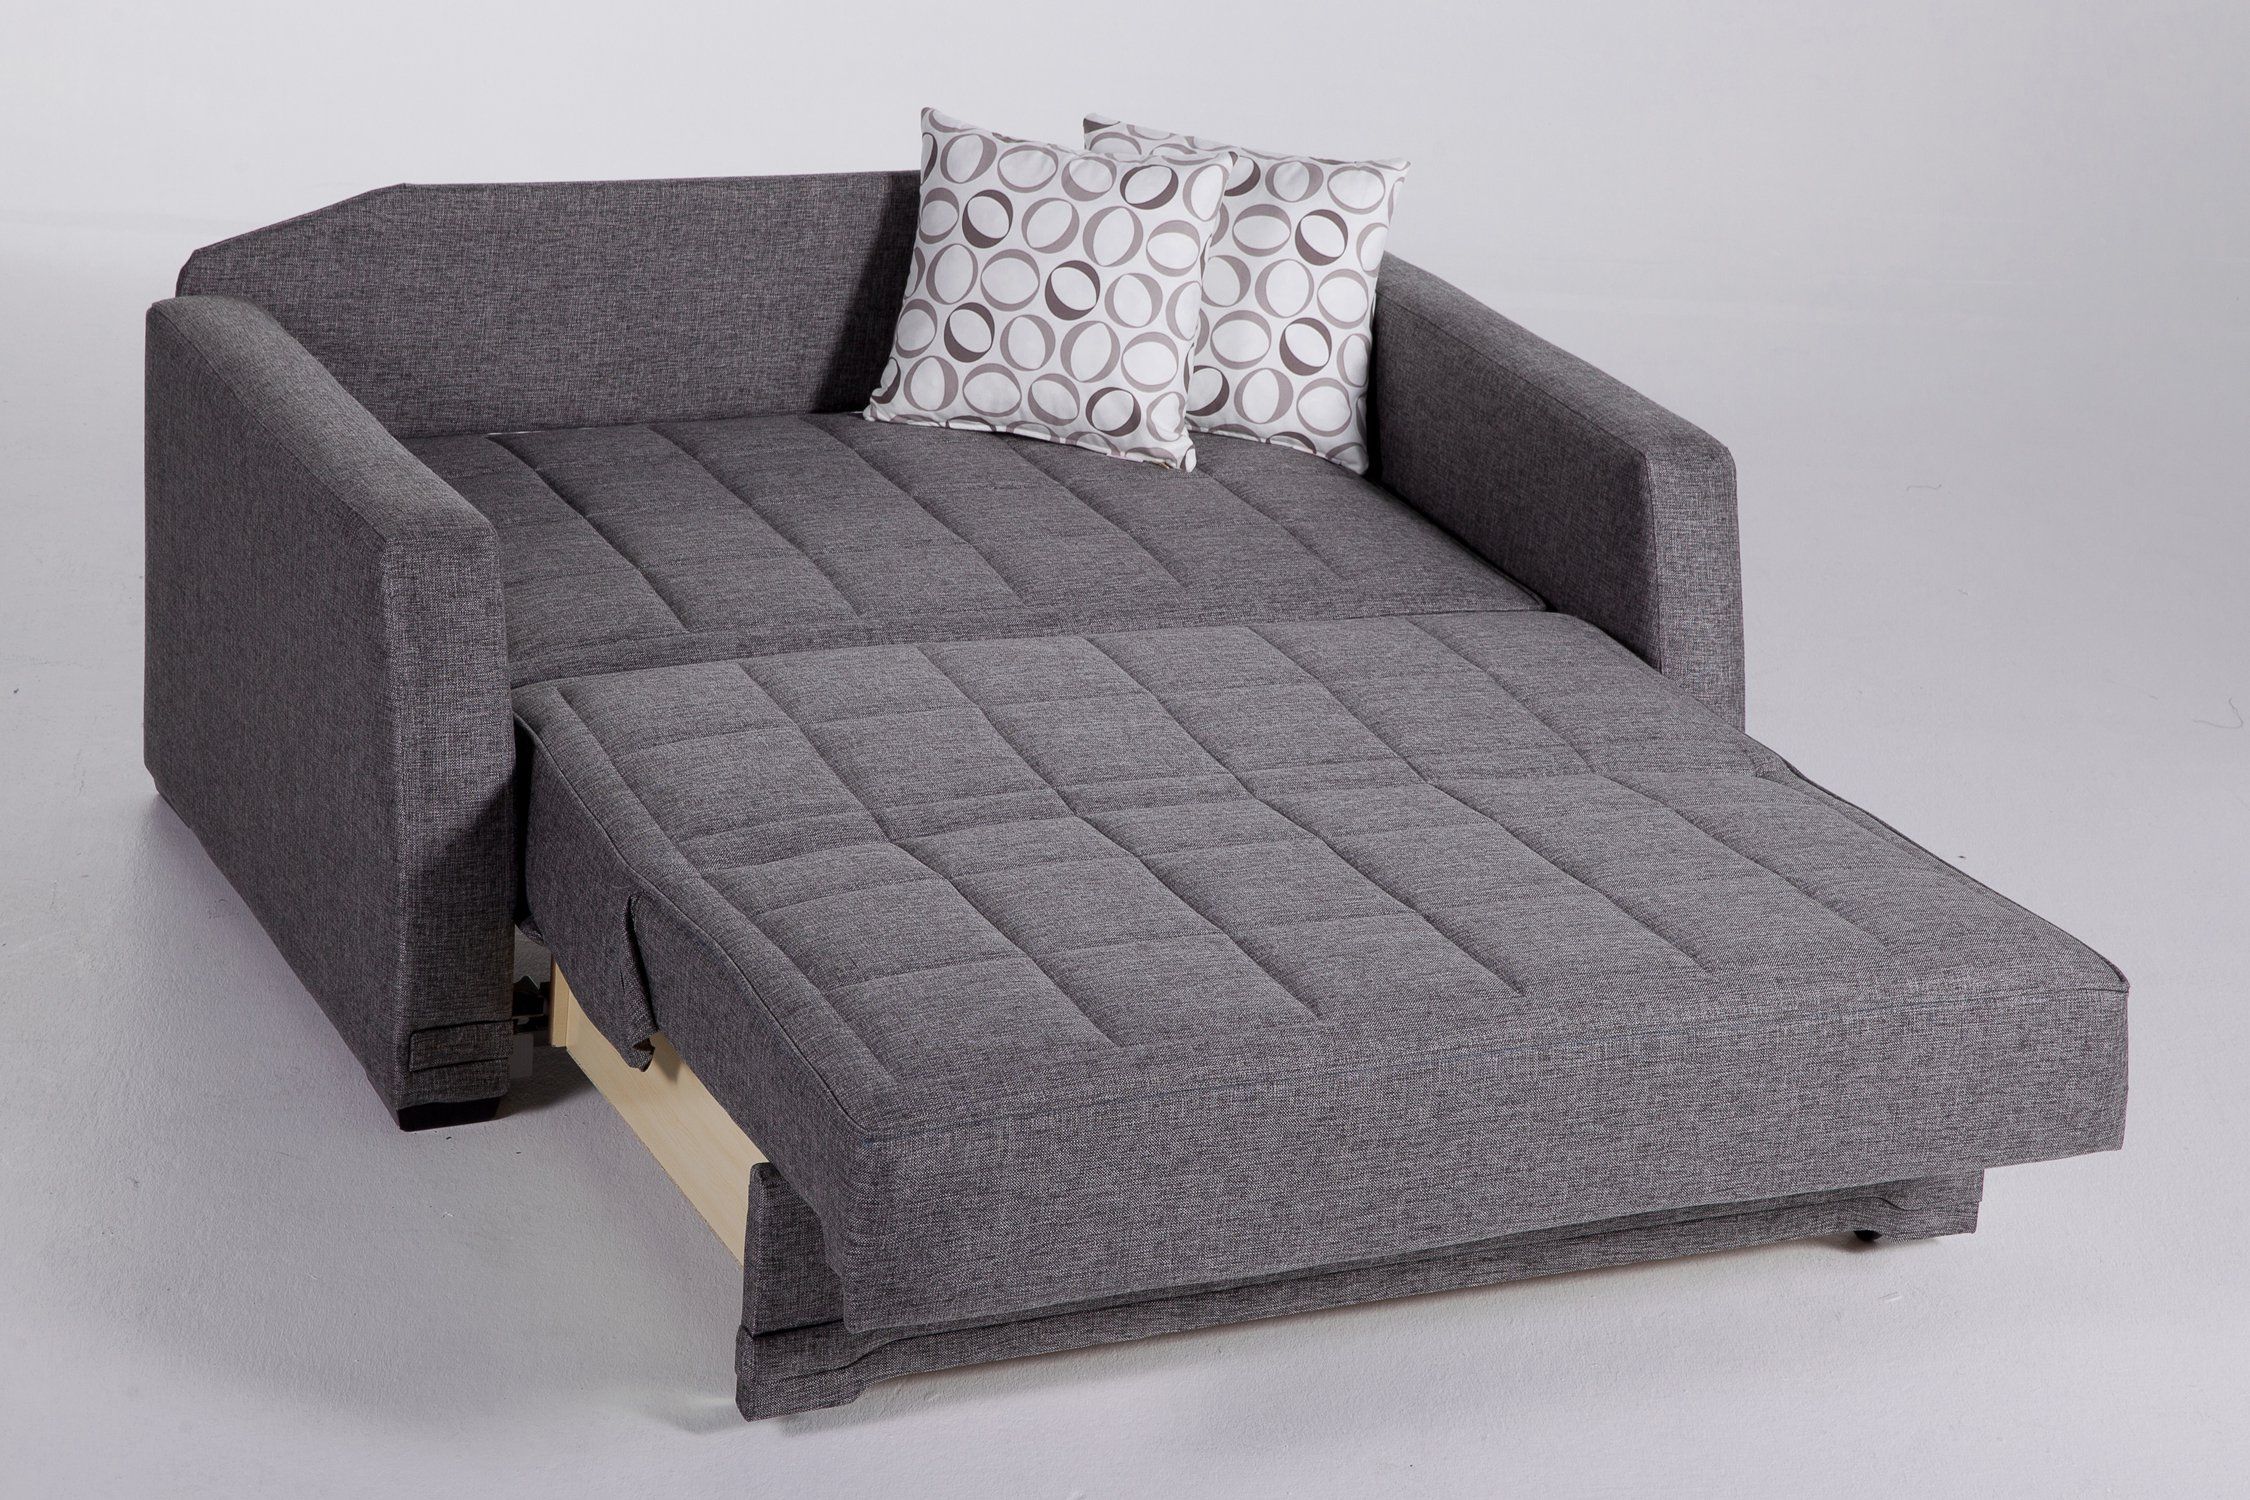 Valerie Diego Gray Loveseat Sleeperistikbal Furniture | Sofa Bed Pertaining To Convertible Gray Loveseat Sleepers (View 19 of 20)